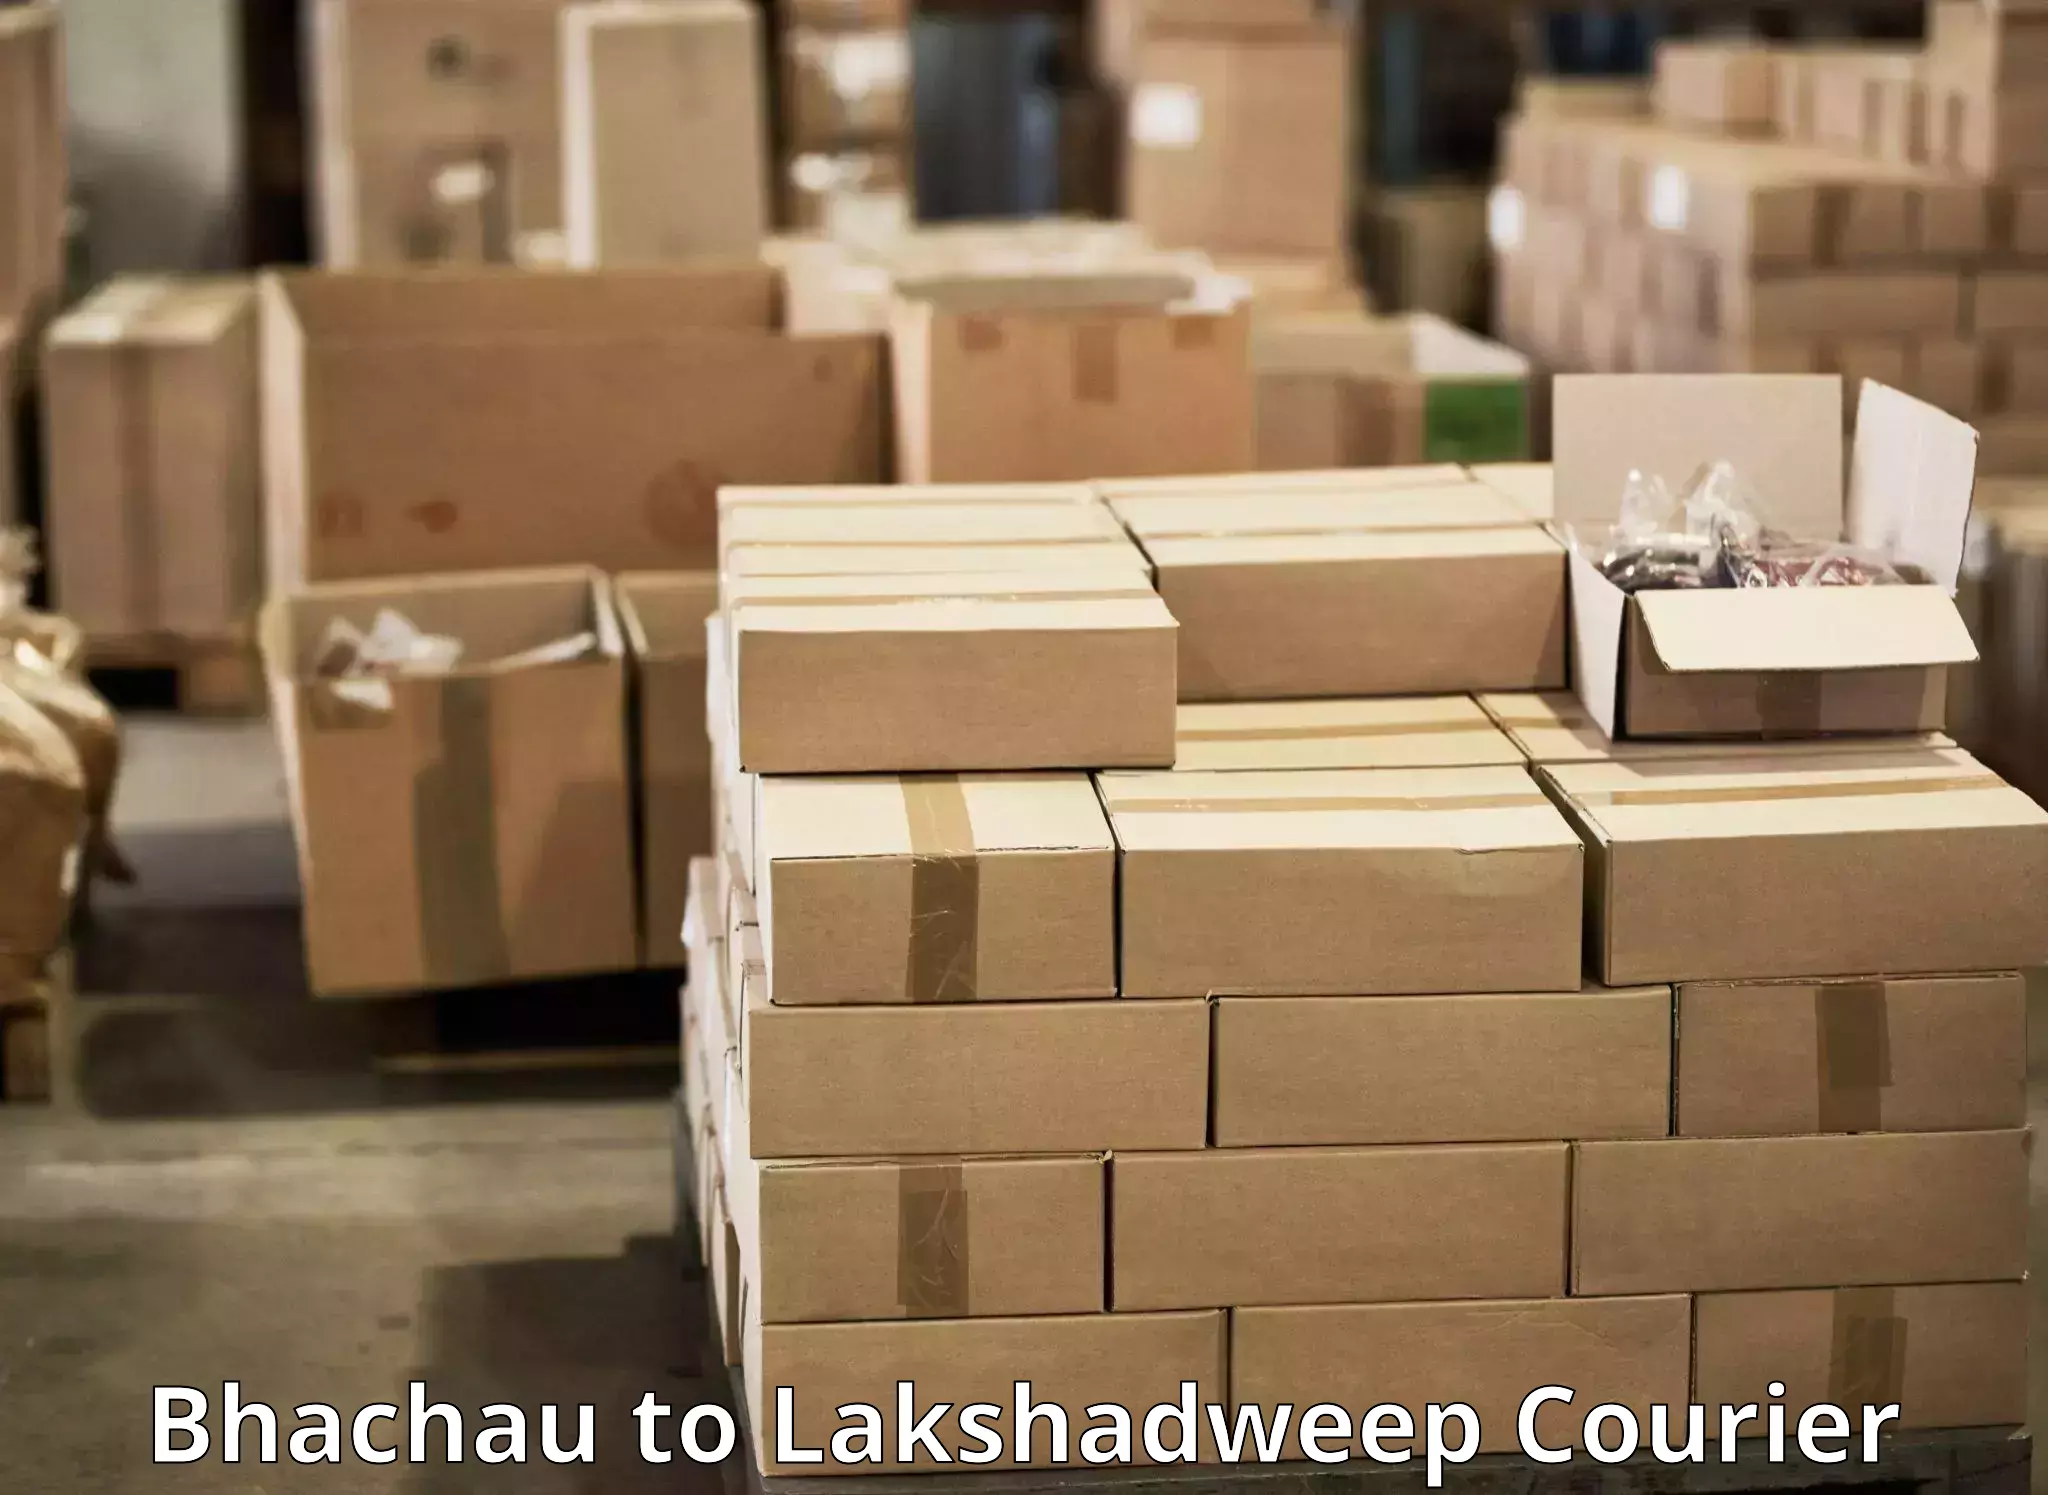 Courier service booking Bhachau to Lakshadweep